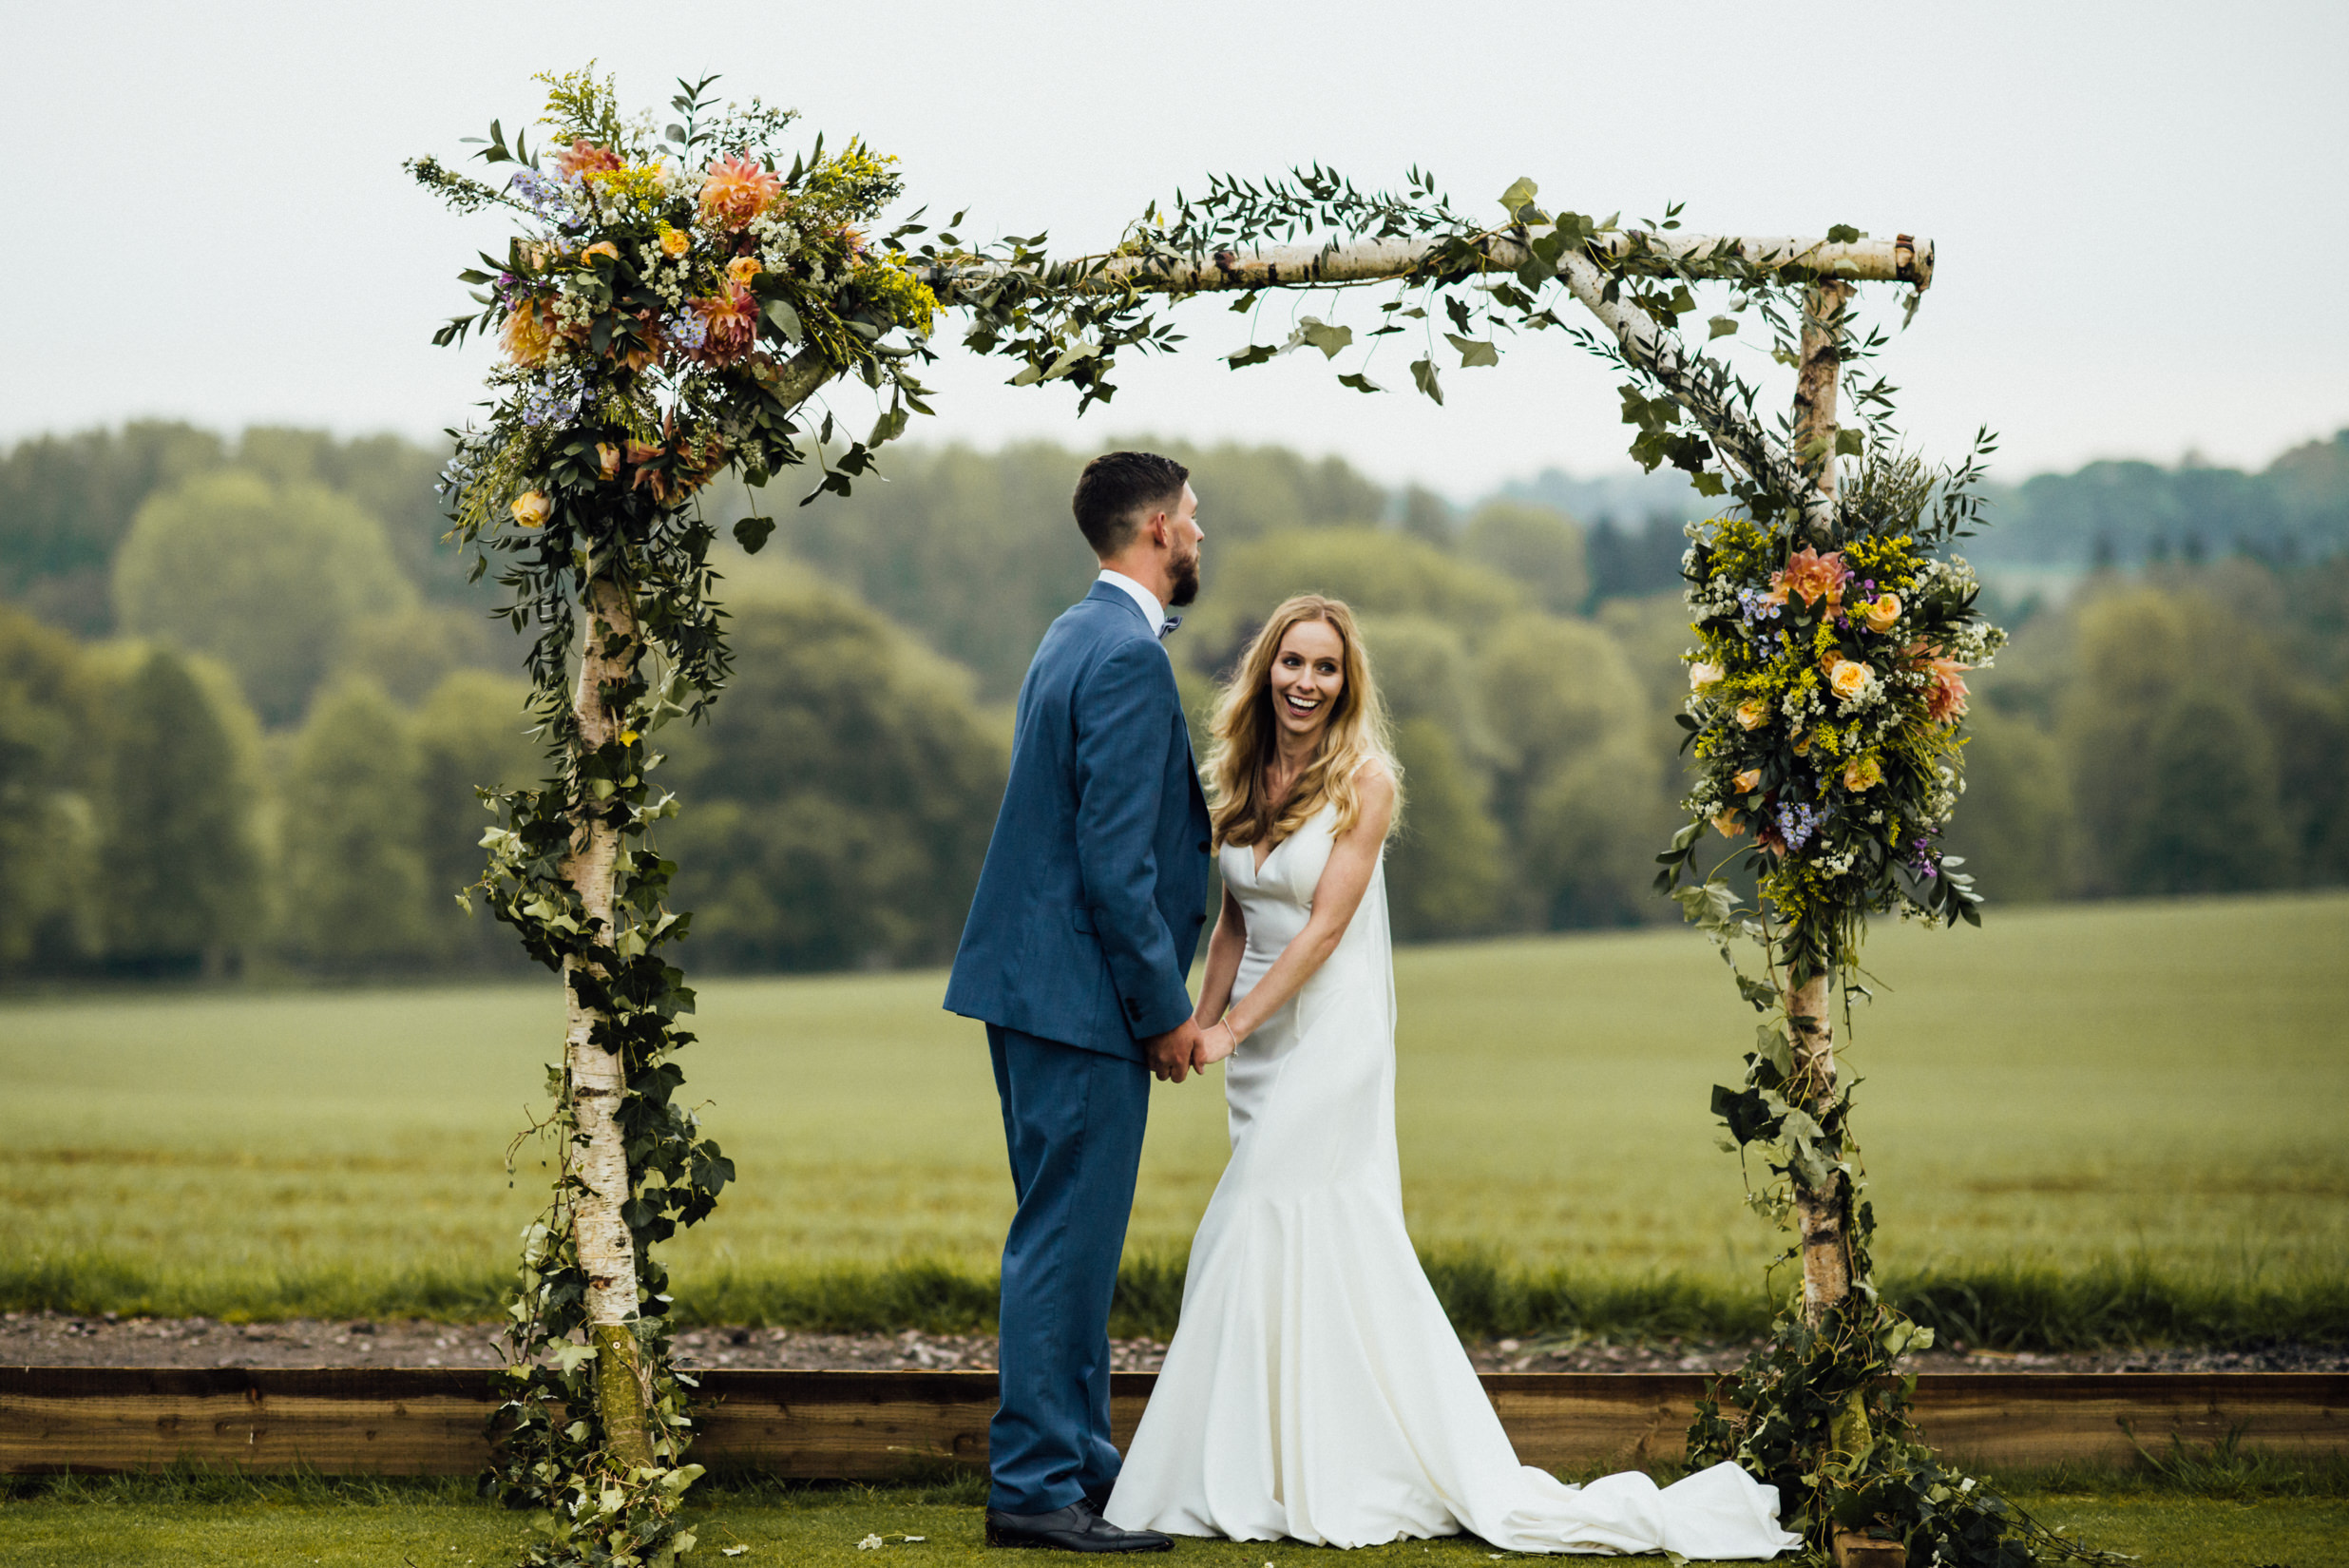 flower arch, romantic wedding photography, natural wedding photography